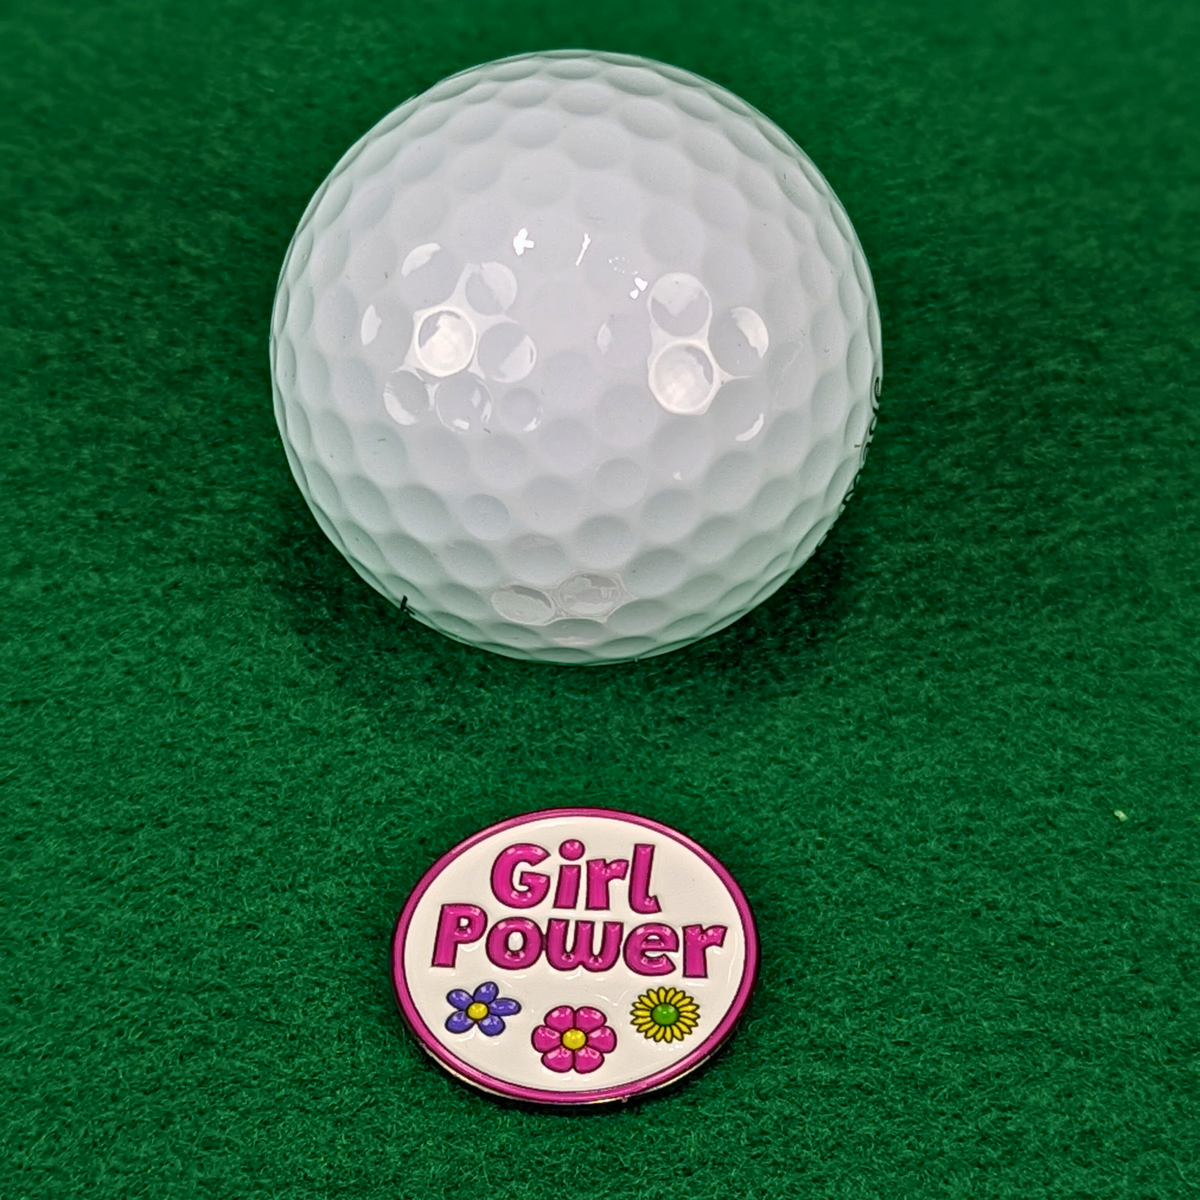 Girl Power - Golf Ball Marker with Magnetic Golf Hat Clip